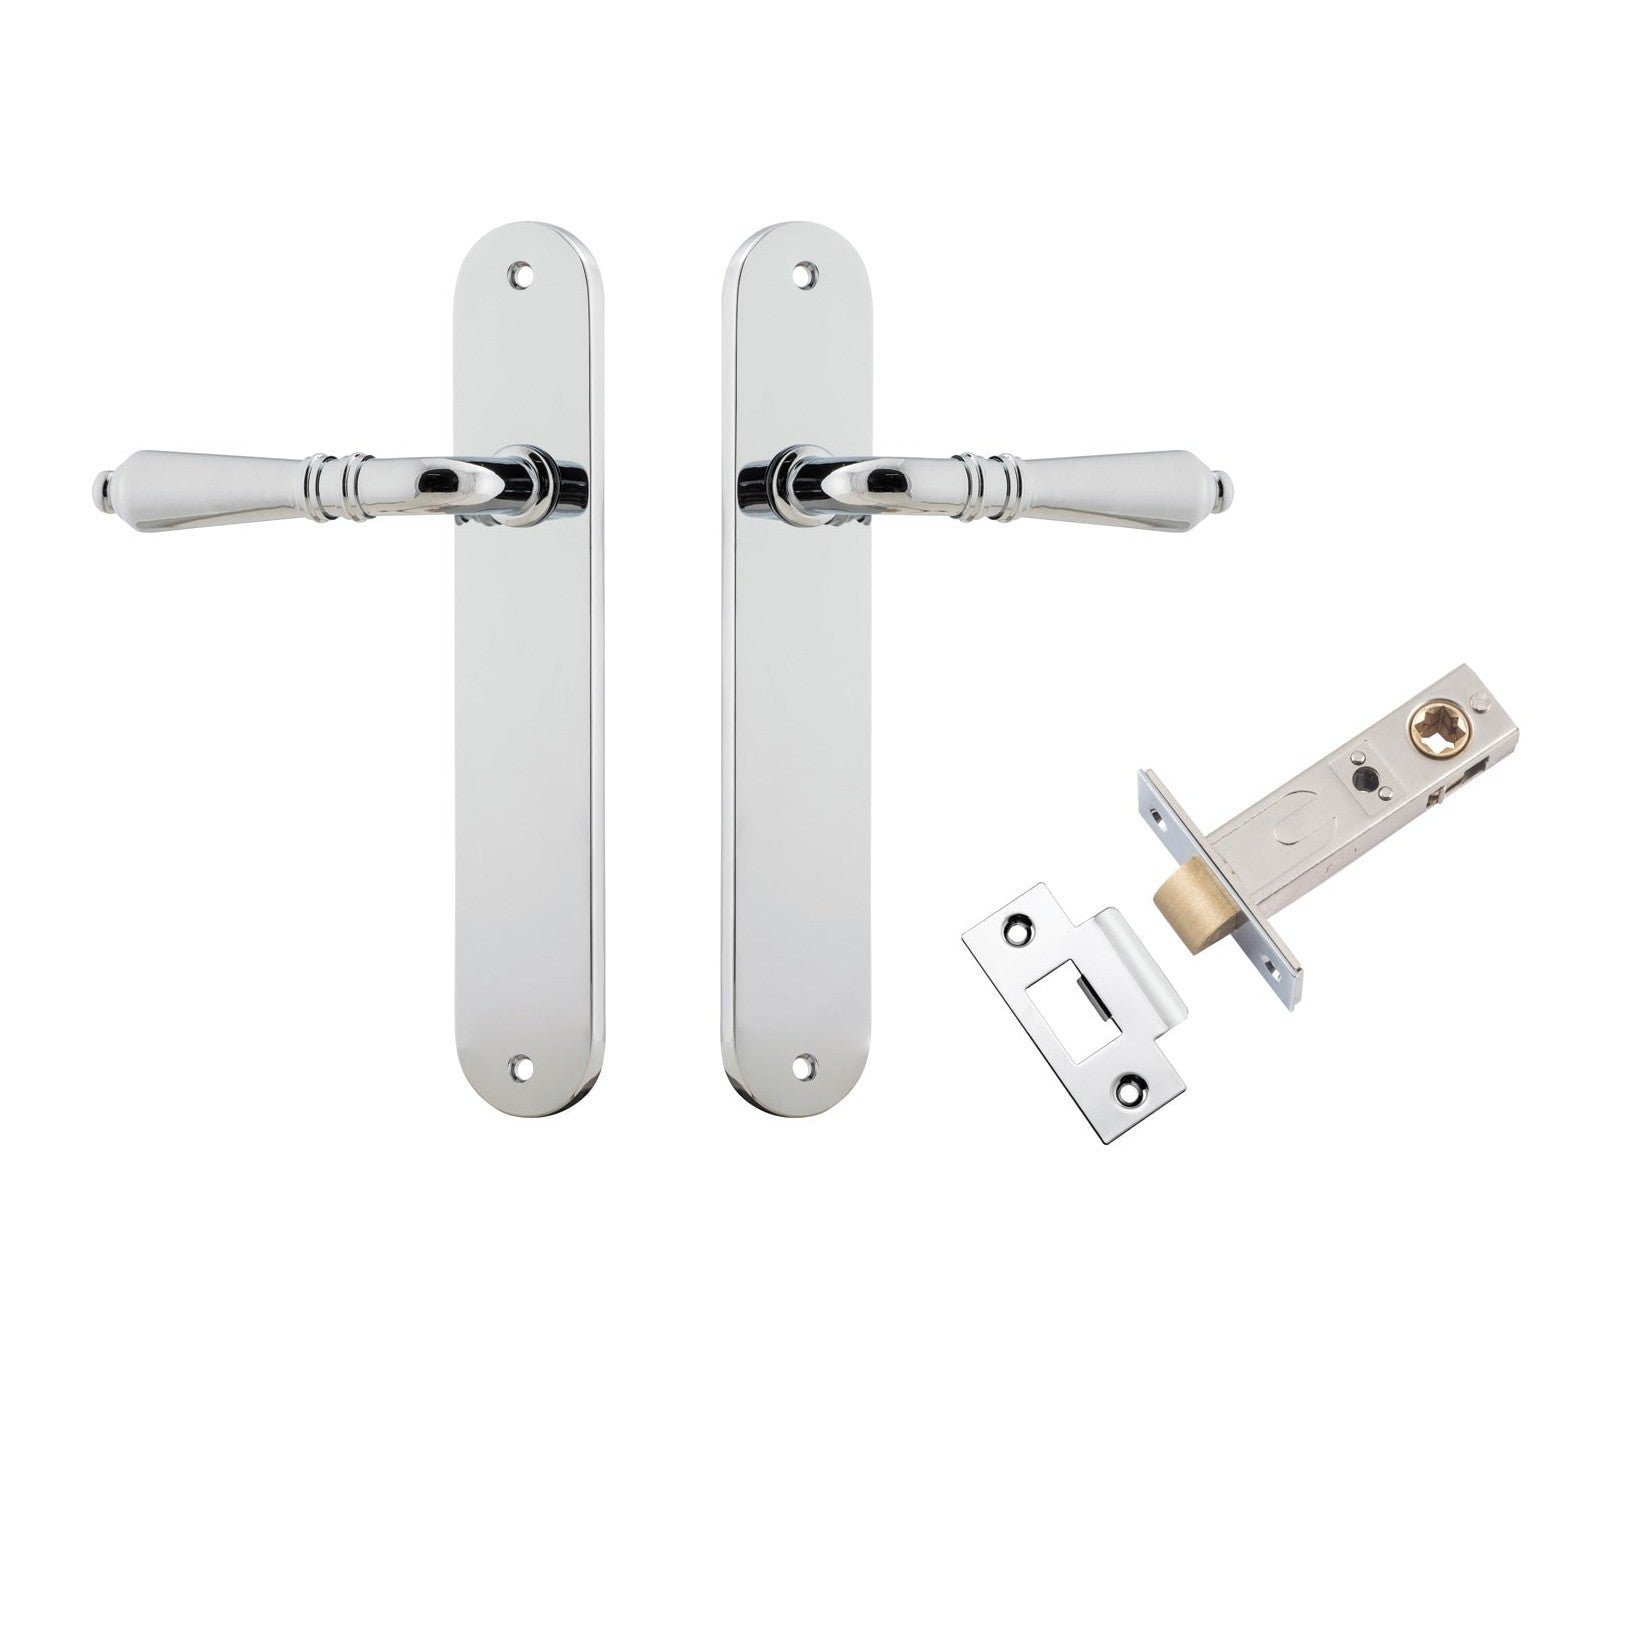 Iver Door Handle Sarlat Oval Latch Polished Chrome Passage Kit